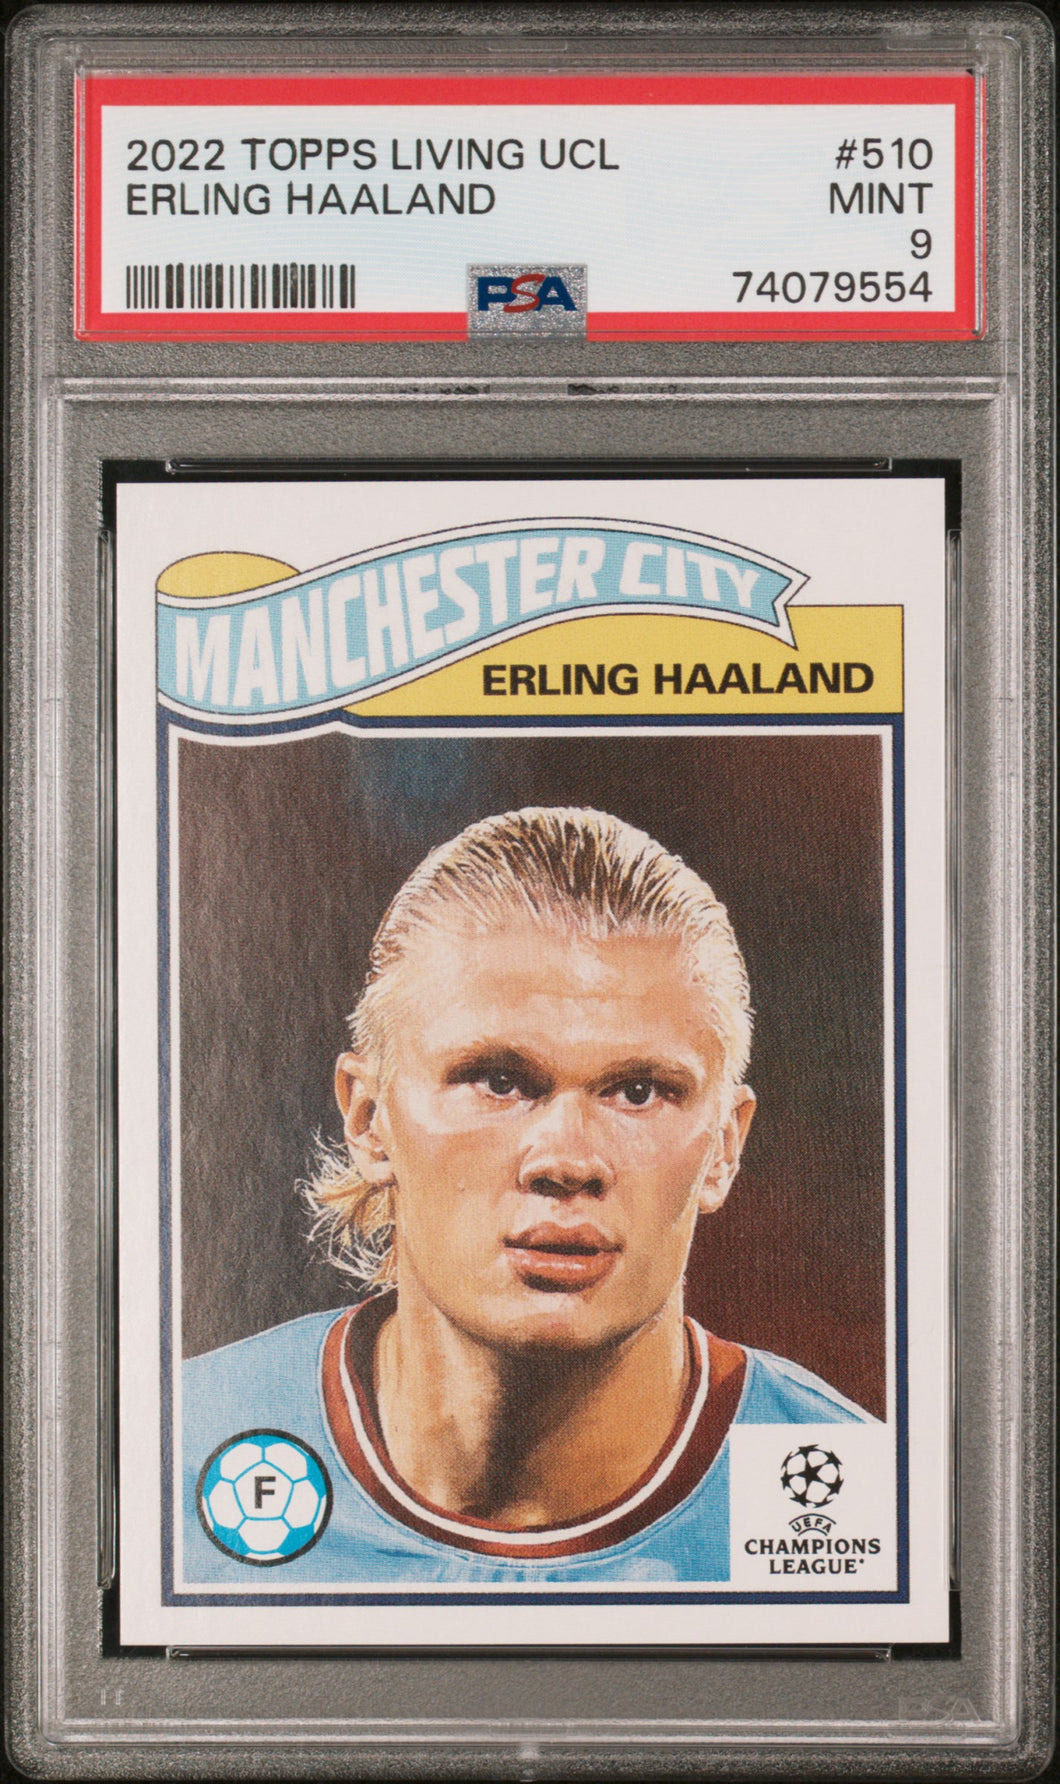 Erling Haaland 2023 Topps Living UCL UEFA Champions League PSA 9 Mint Manchester City